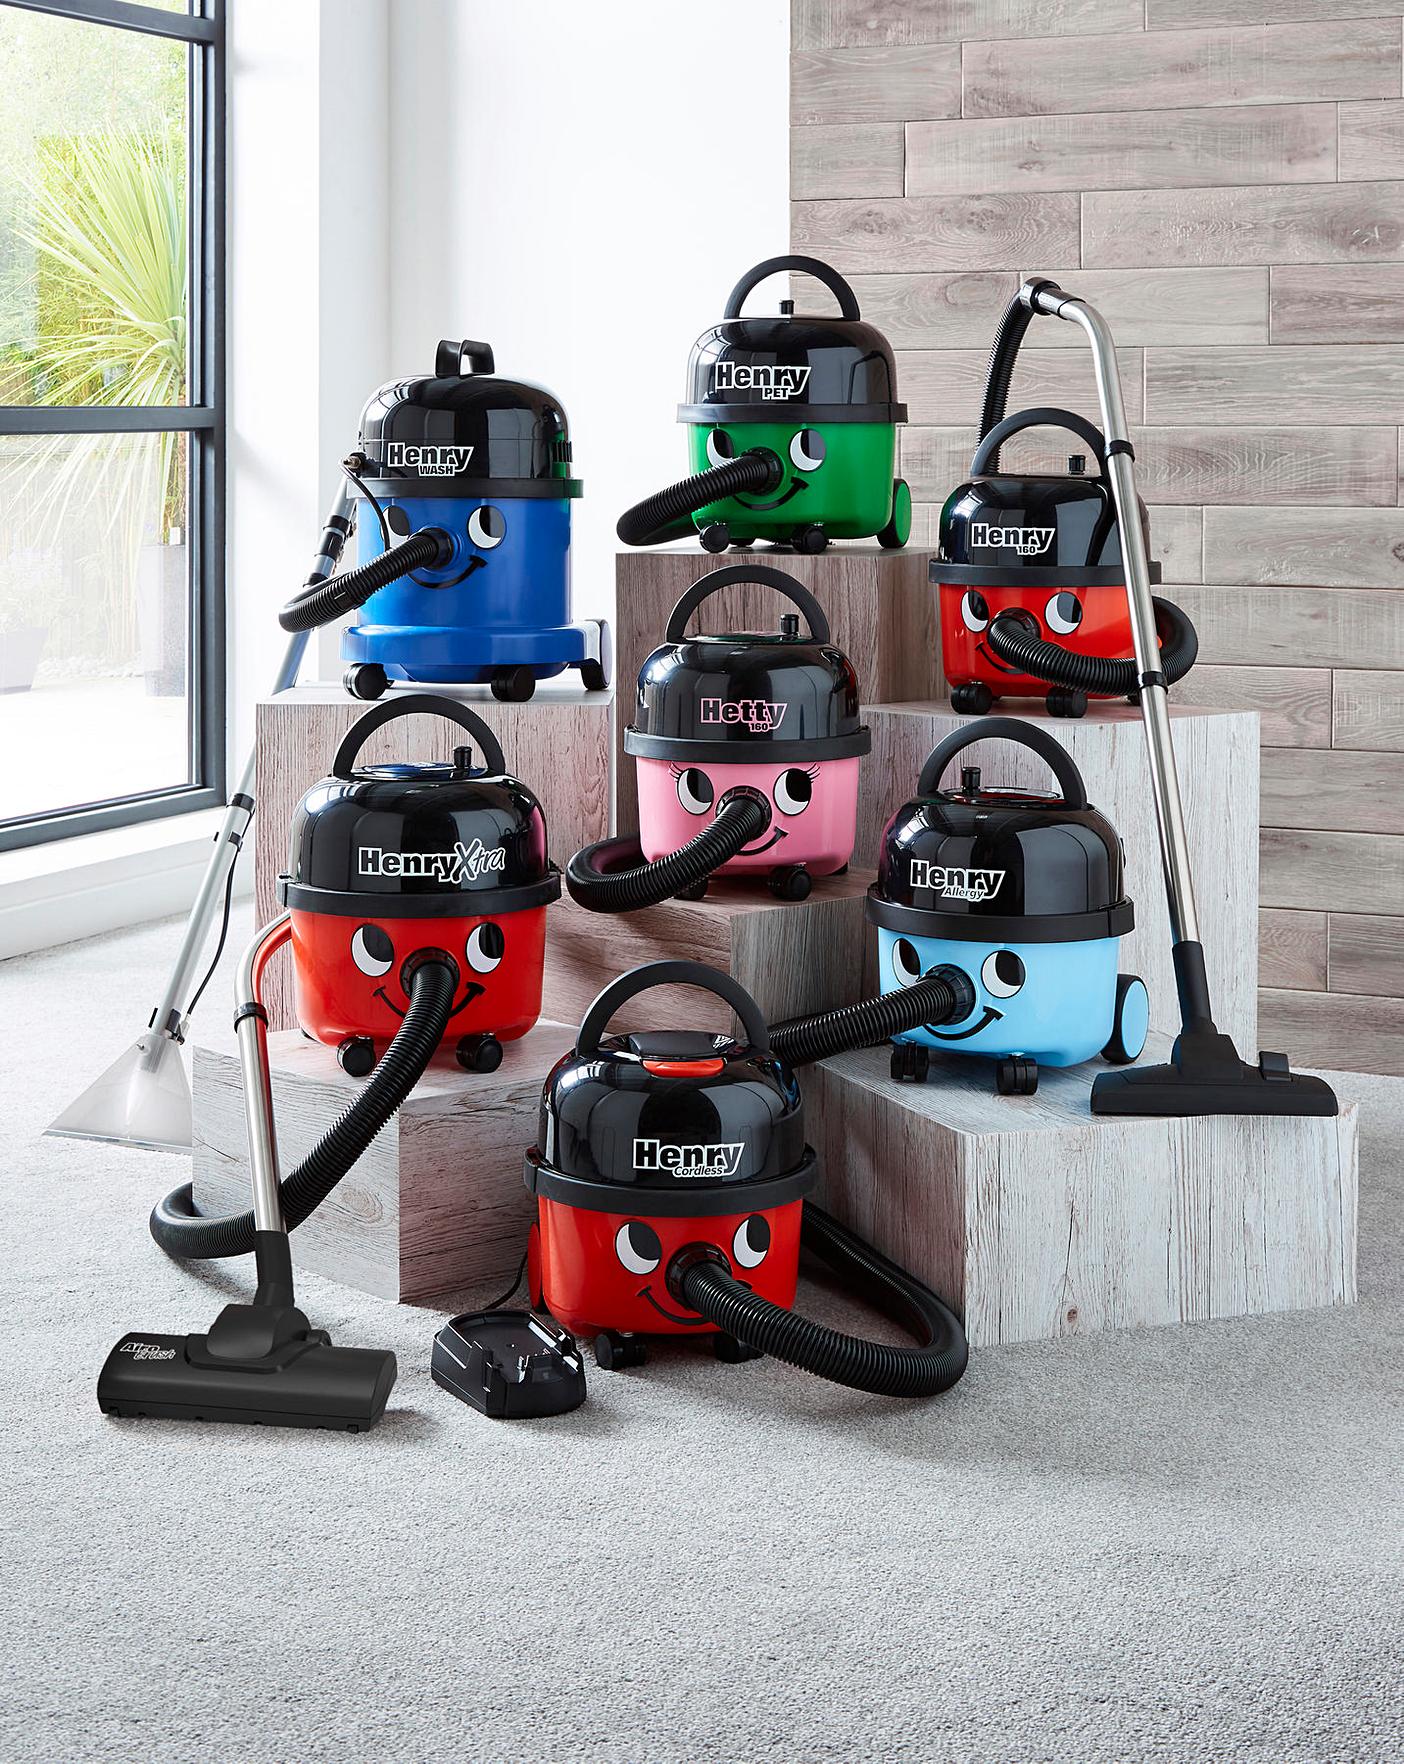 Henry Vacuum cleaners